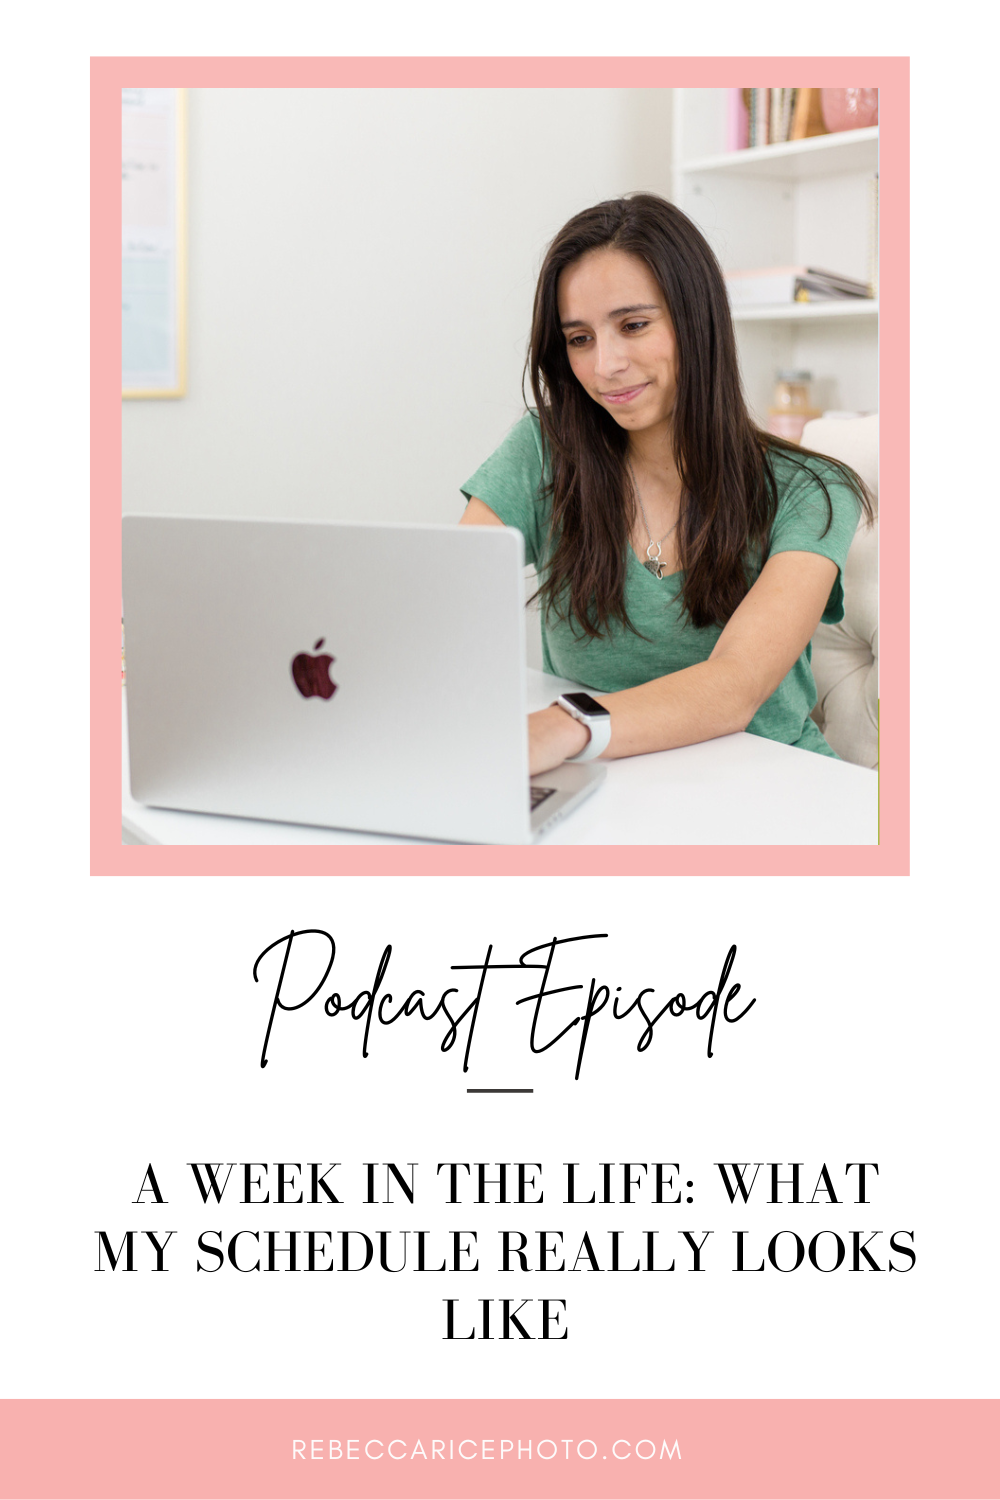 The Business Journey Podcast with Rebecca Rice- A Week in the Life: What My Schedule Really Looks Like